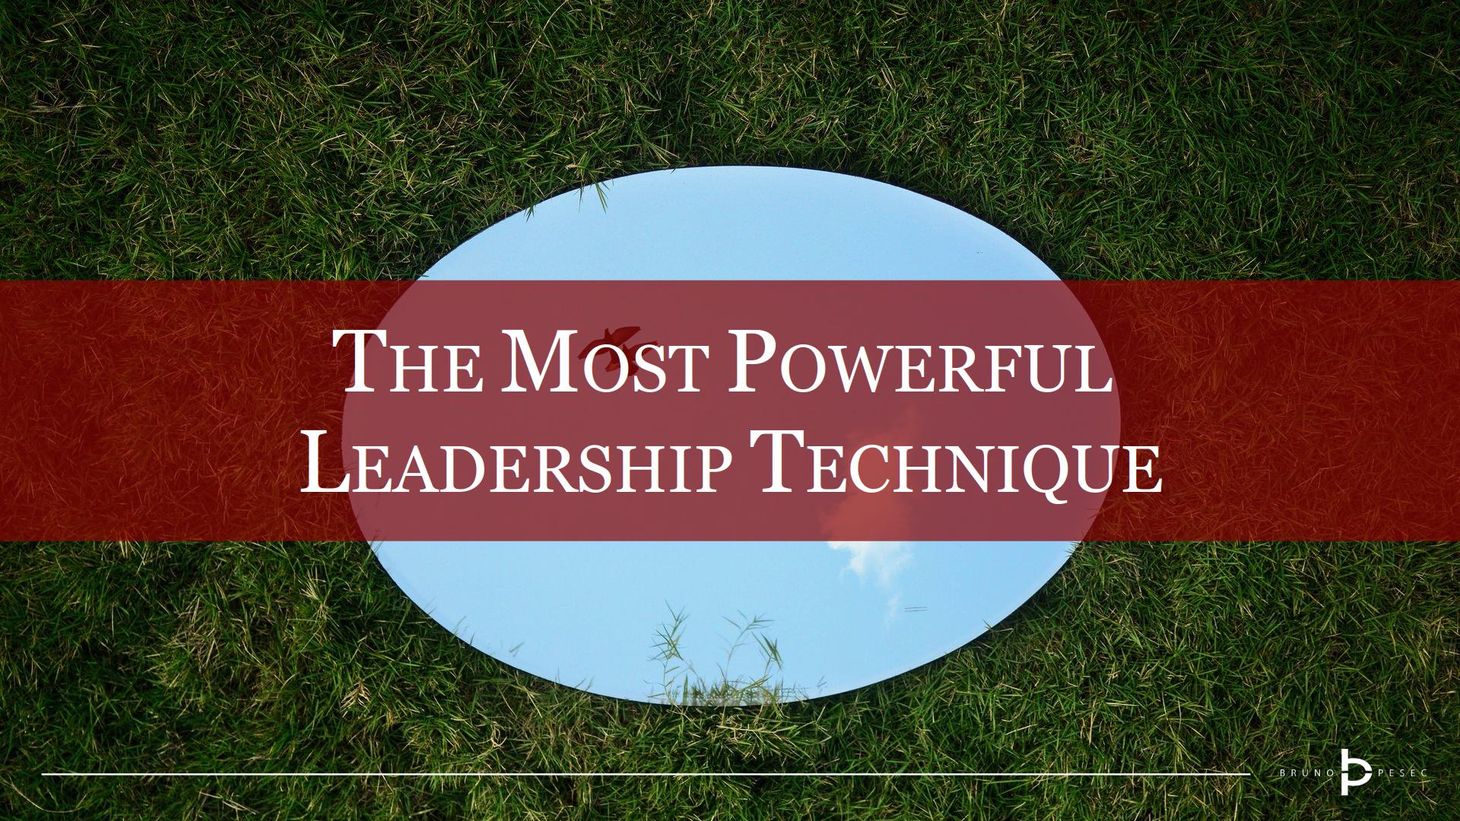 The most powerful leadership technique